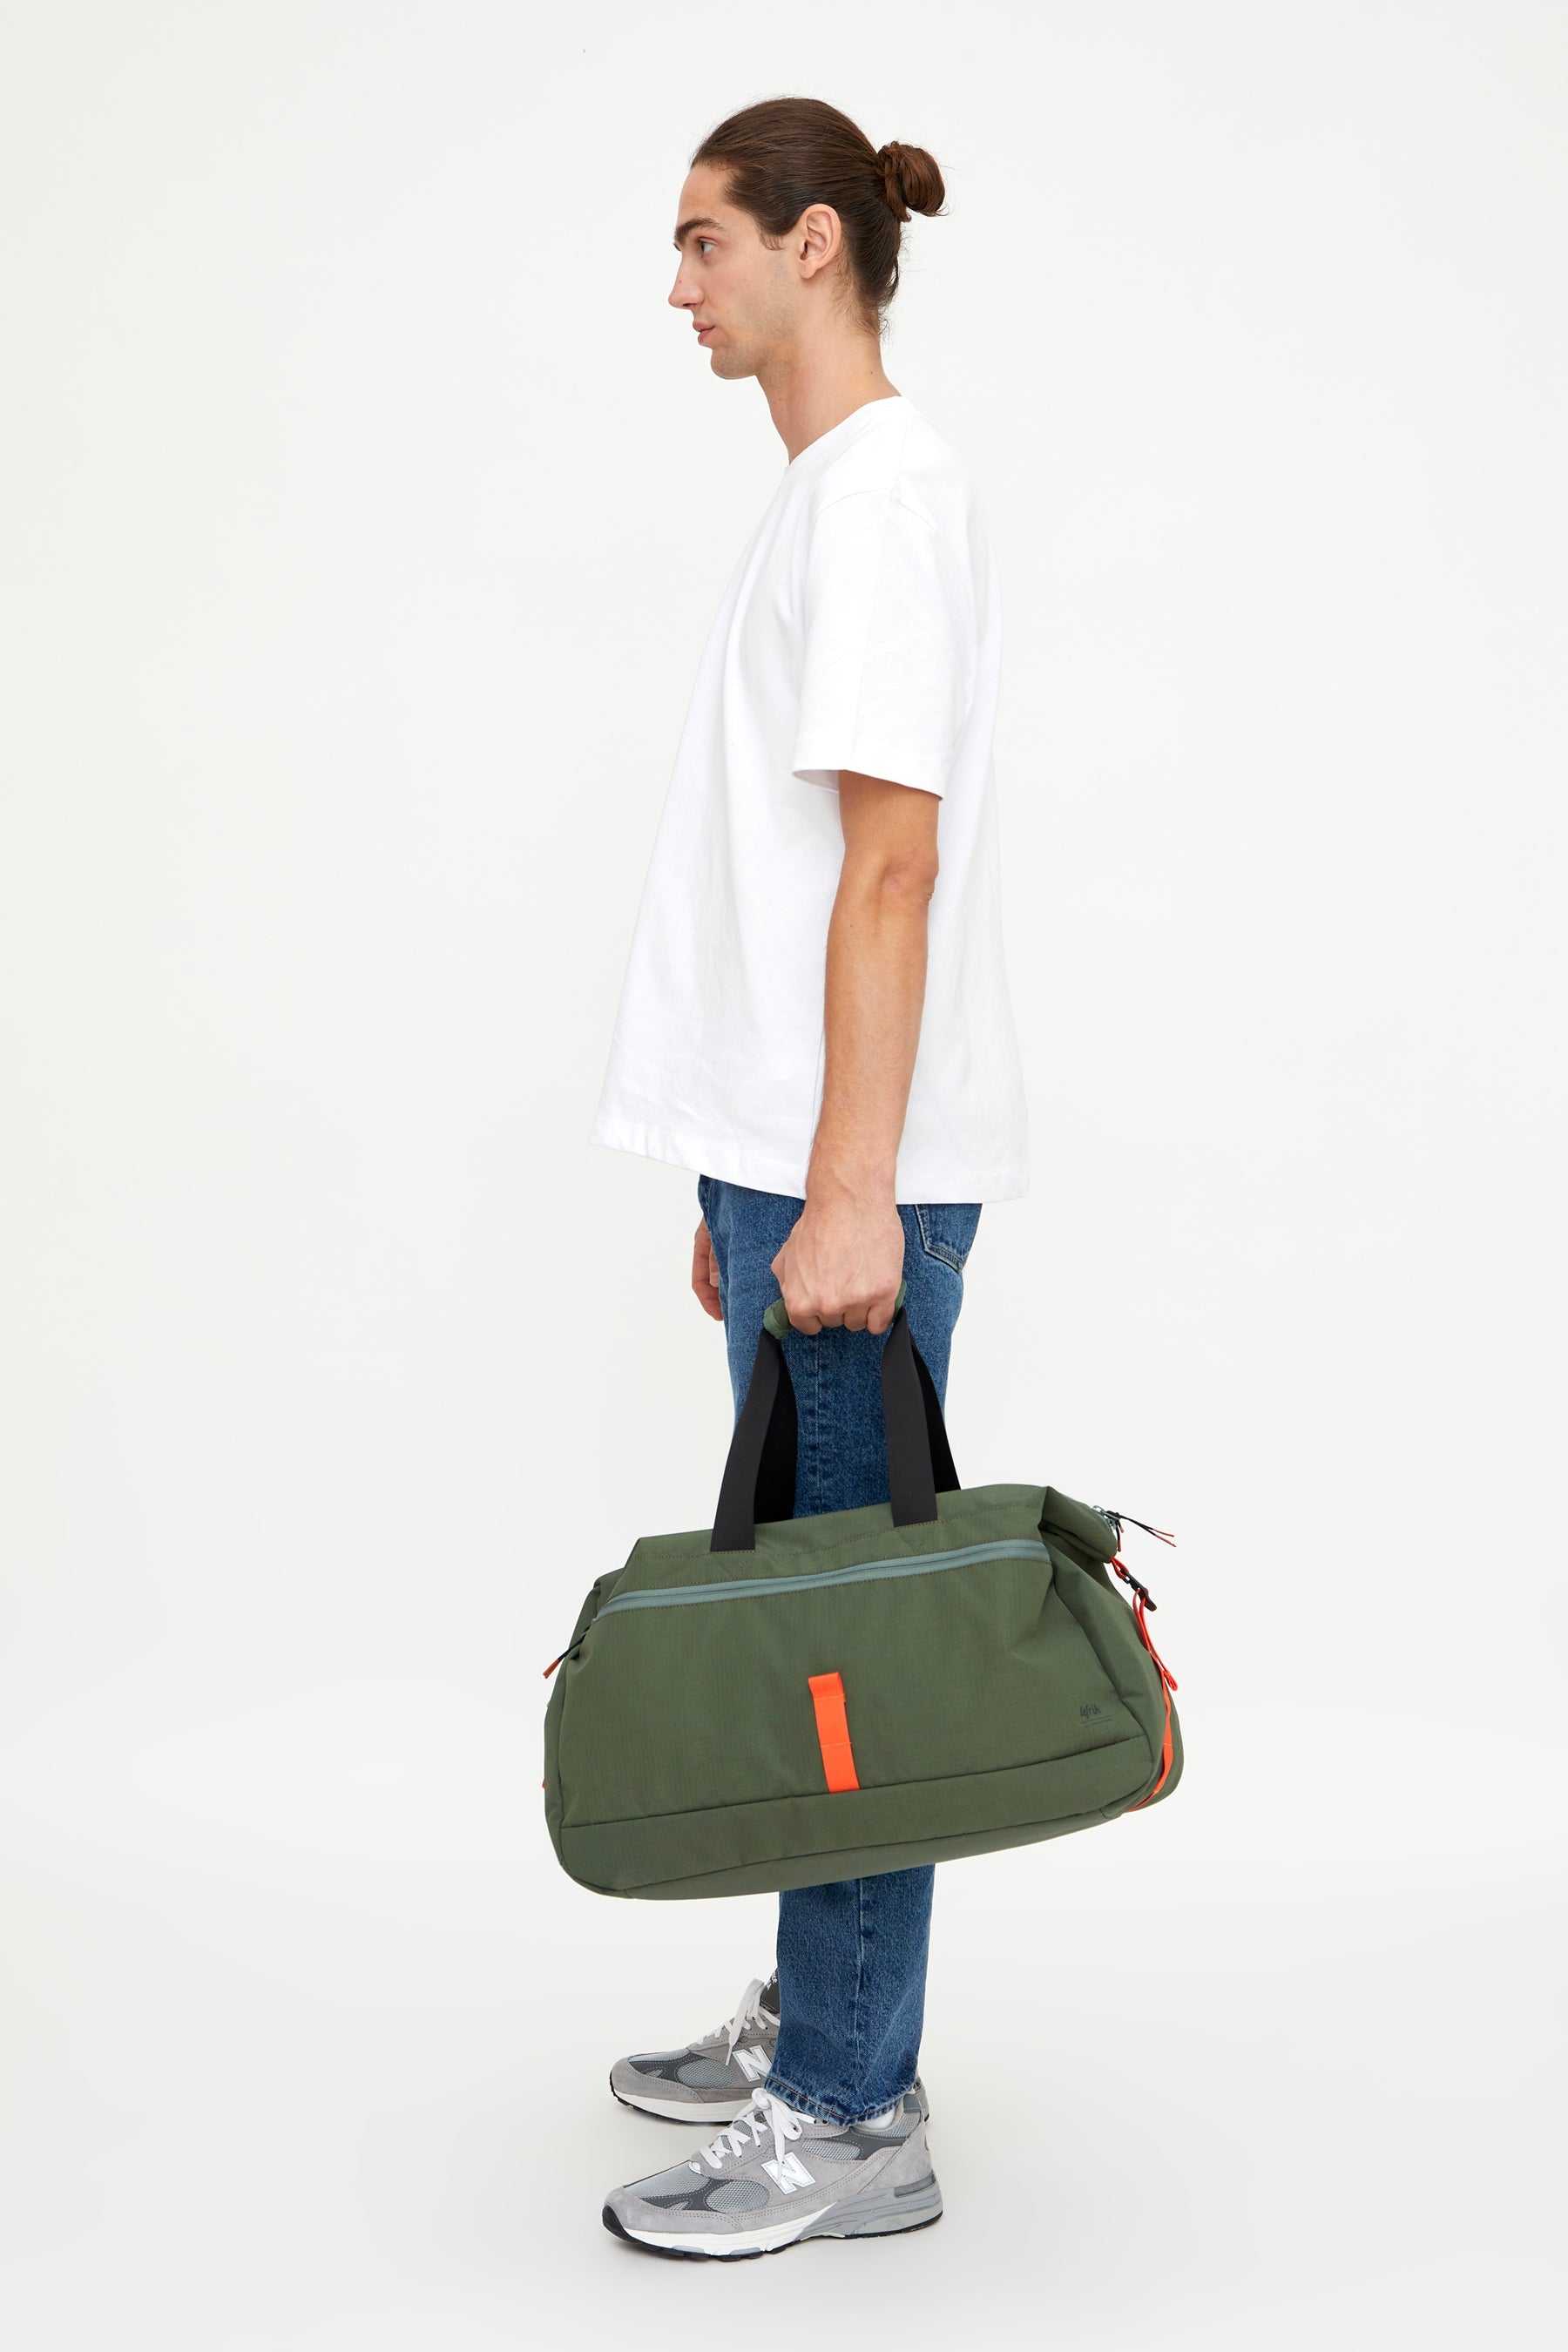 Green Vandra travel bag made from recycled PET from Lefrik